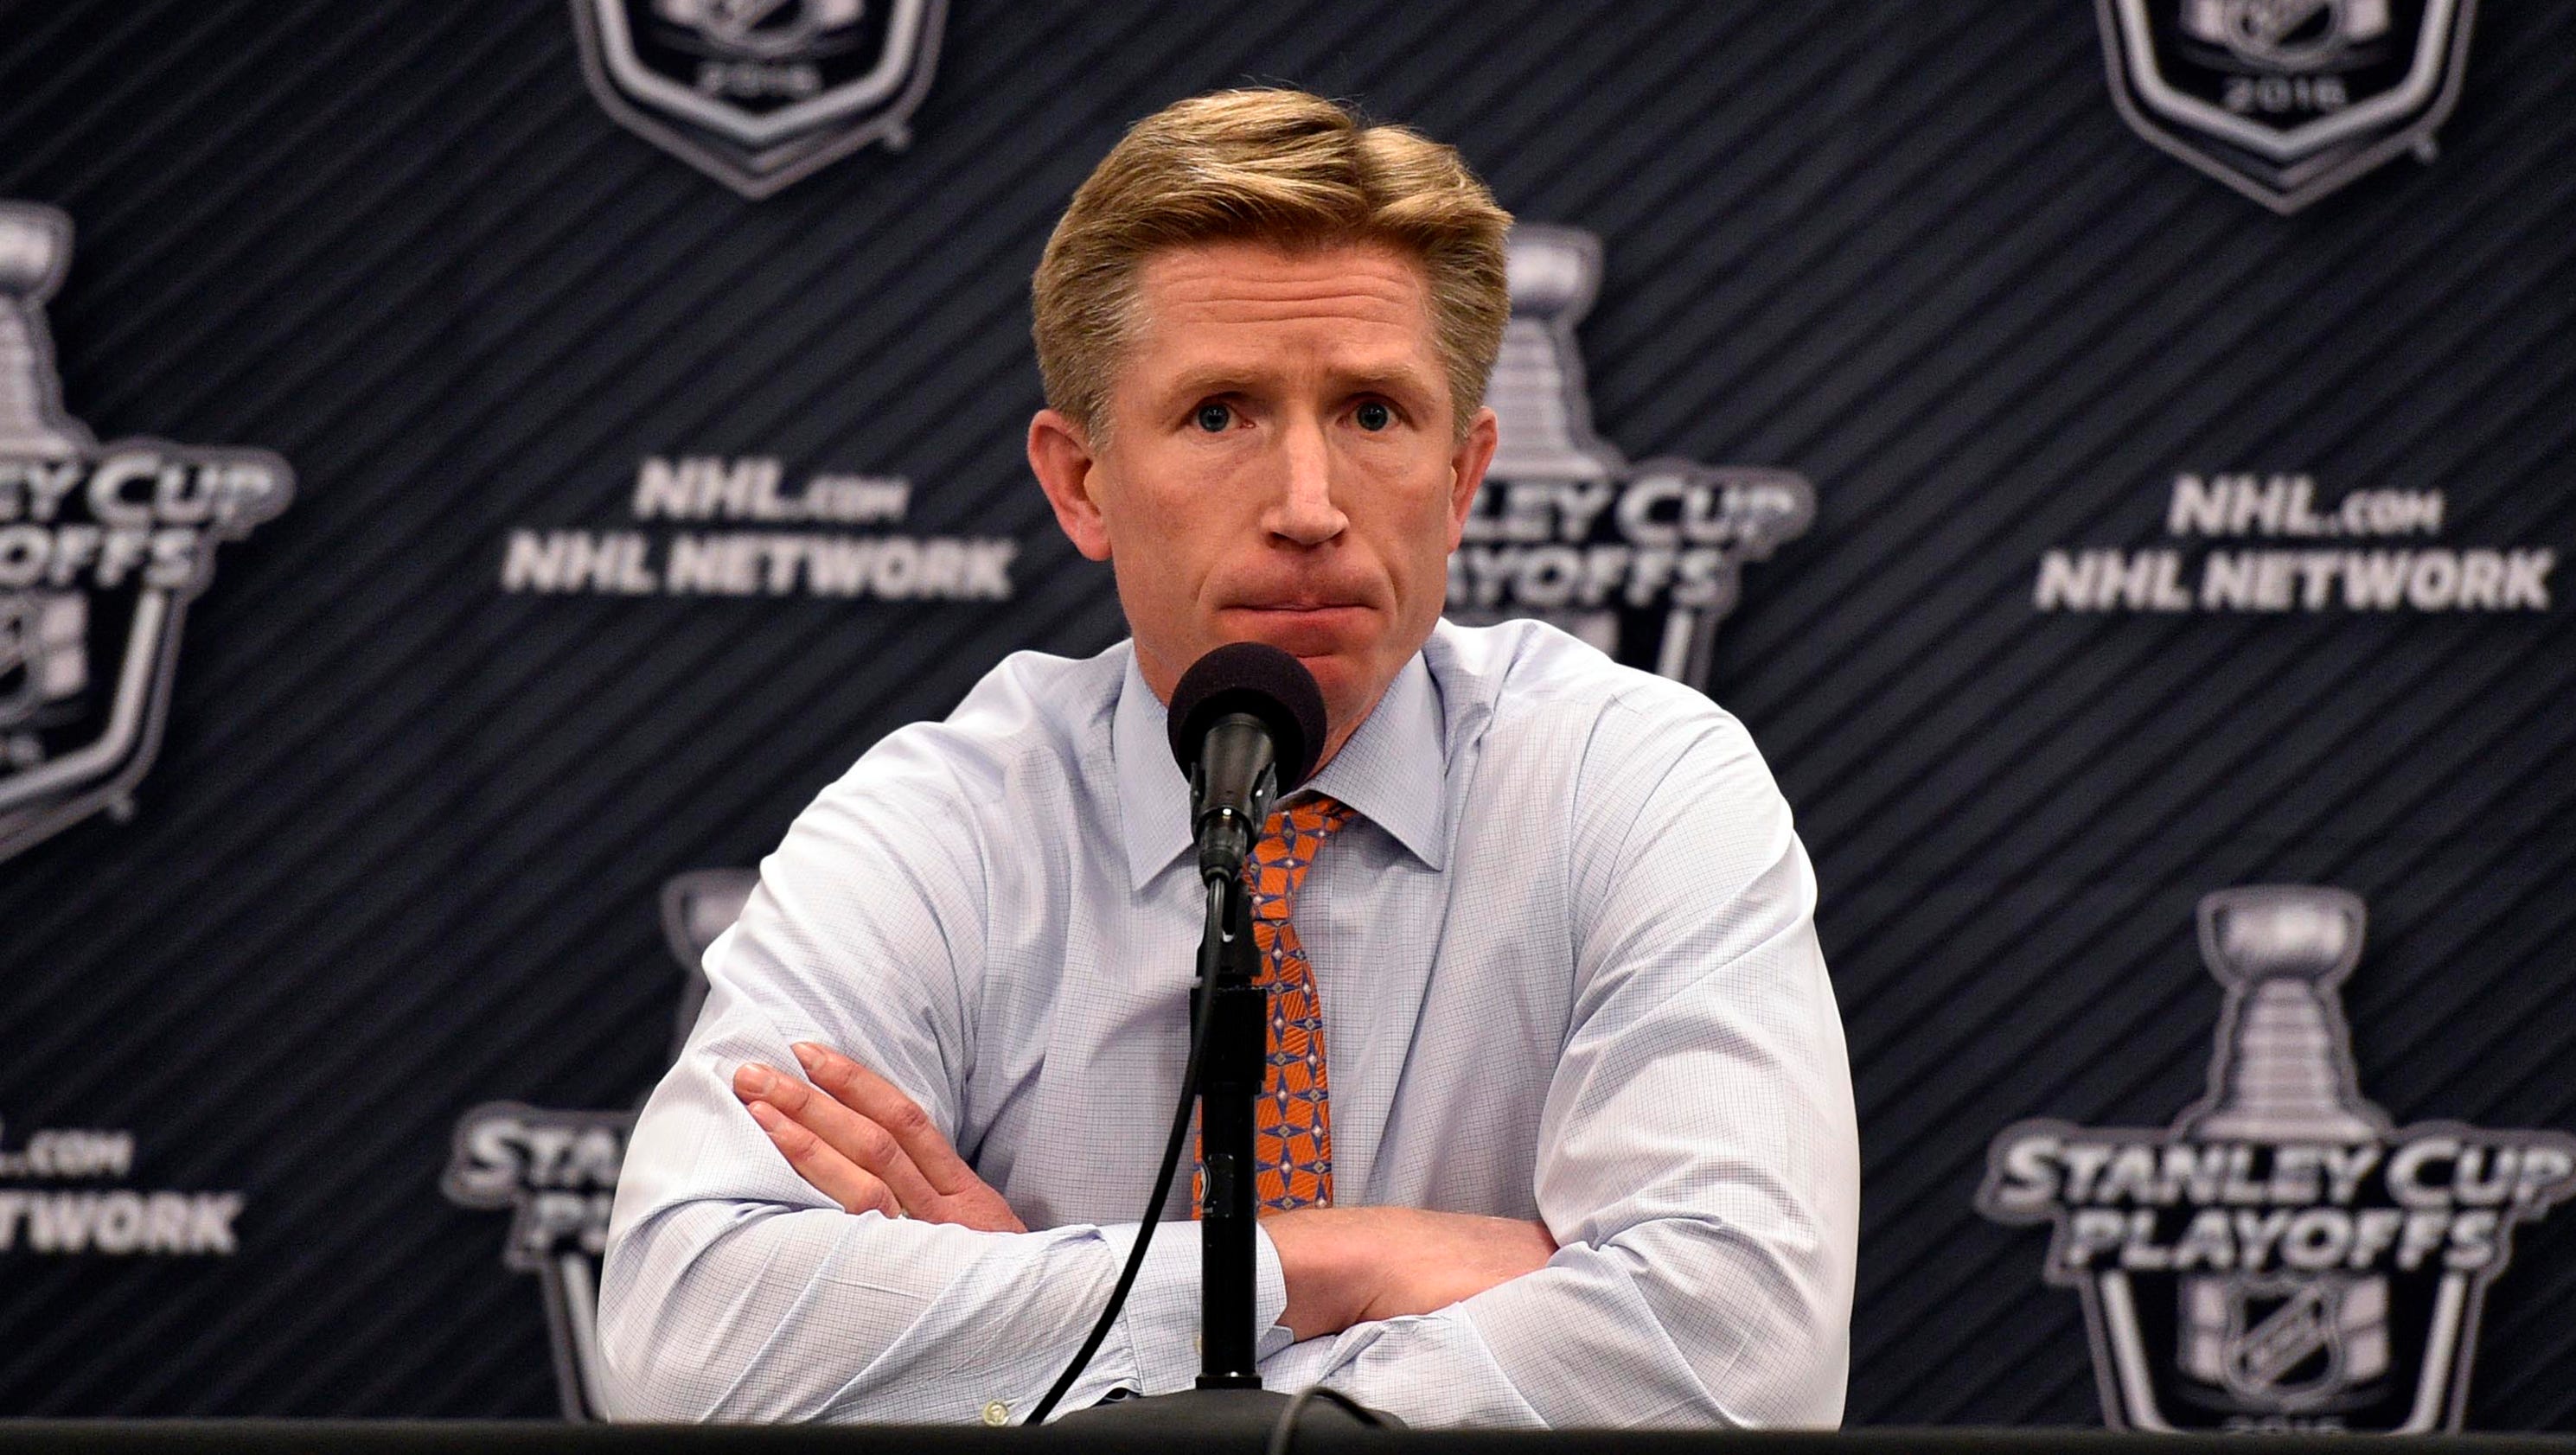 Dave Hakstol not looking like a risk anymore